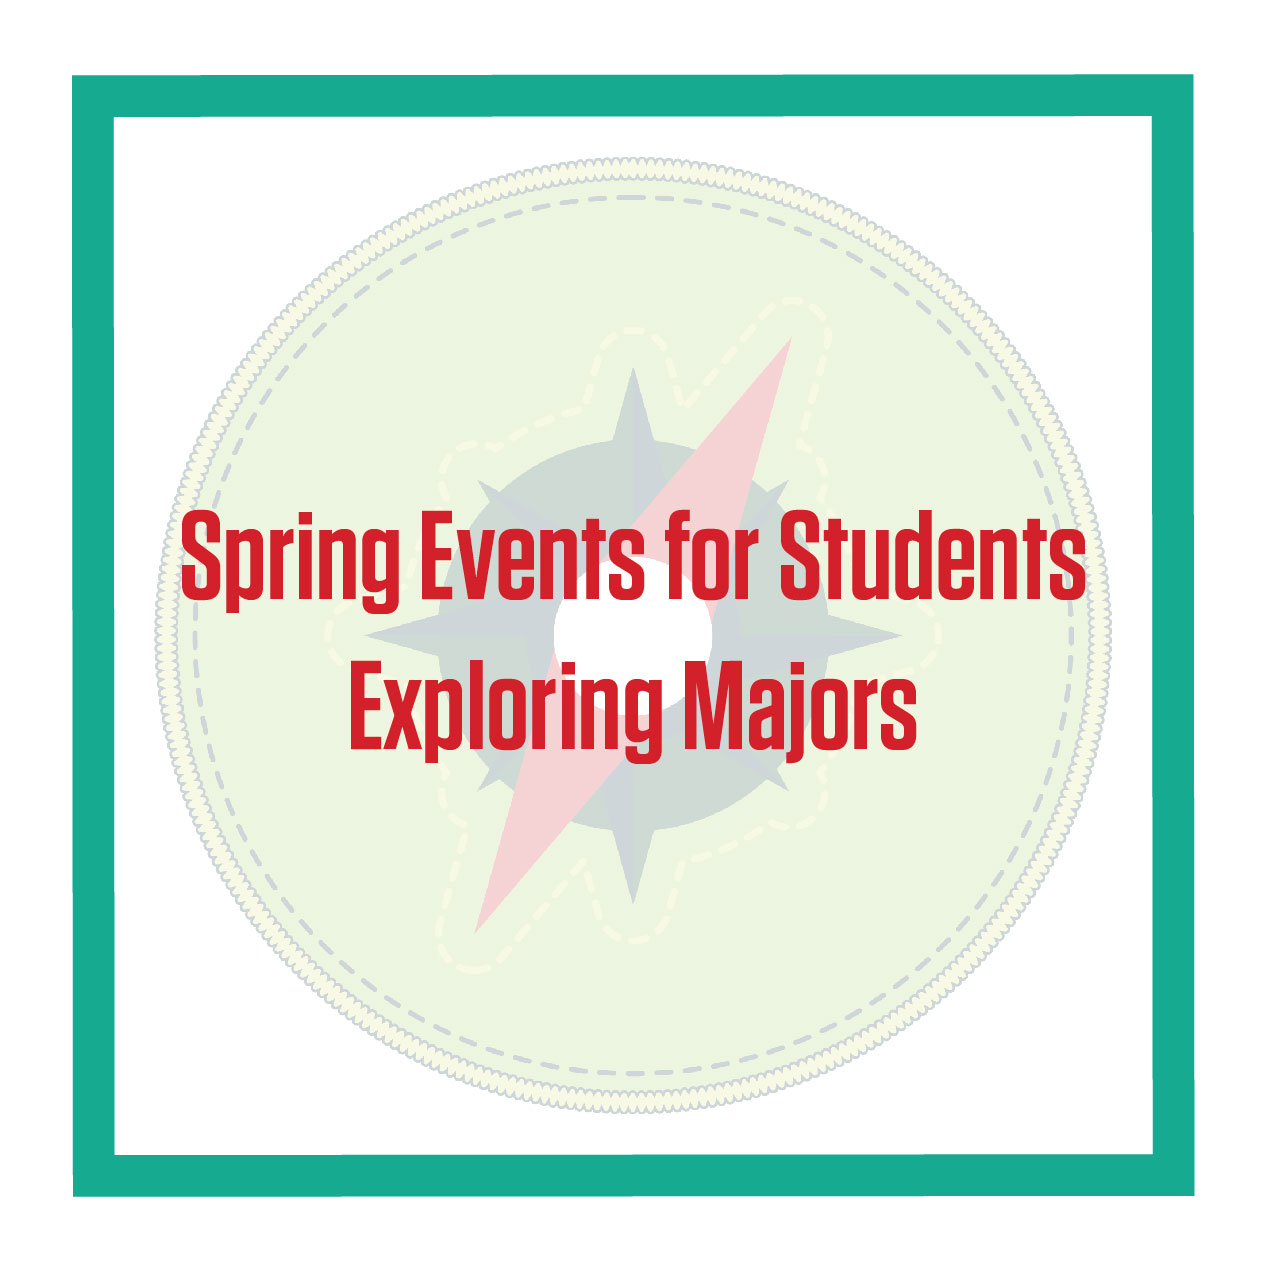 View the flier with spring events.